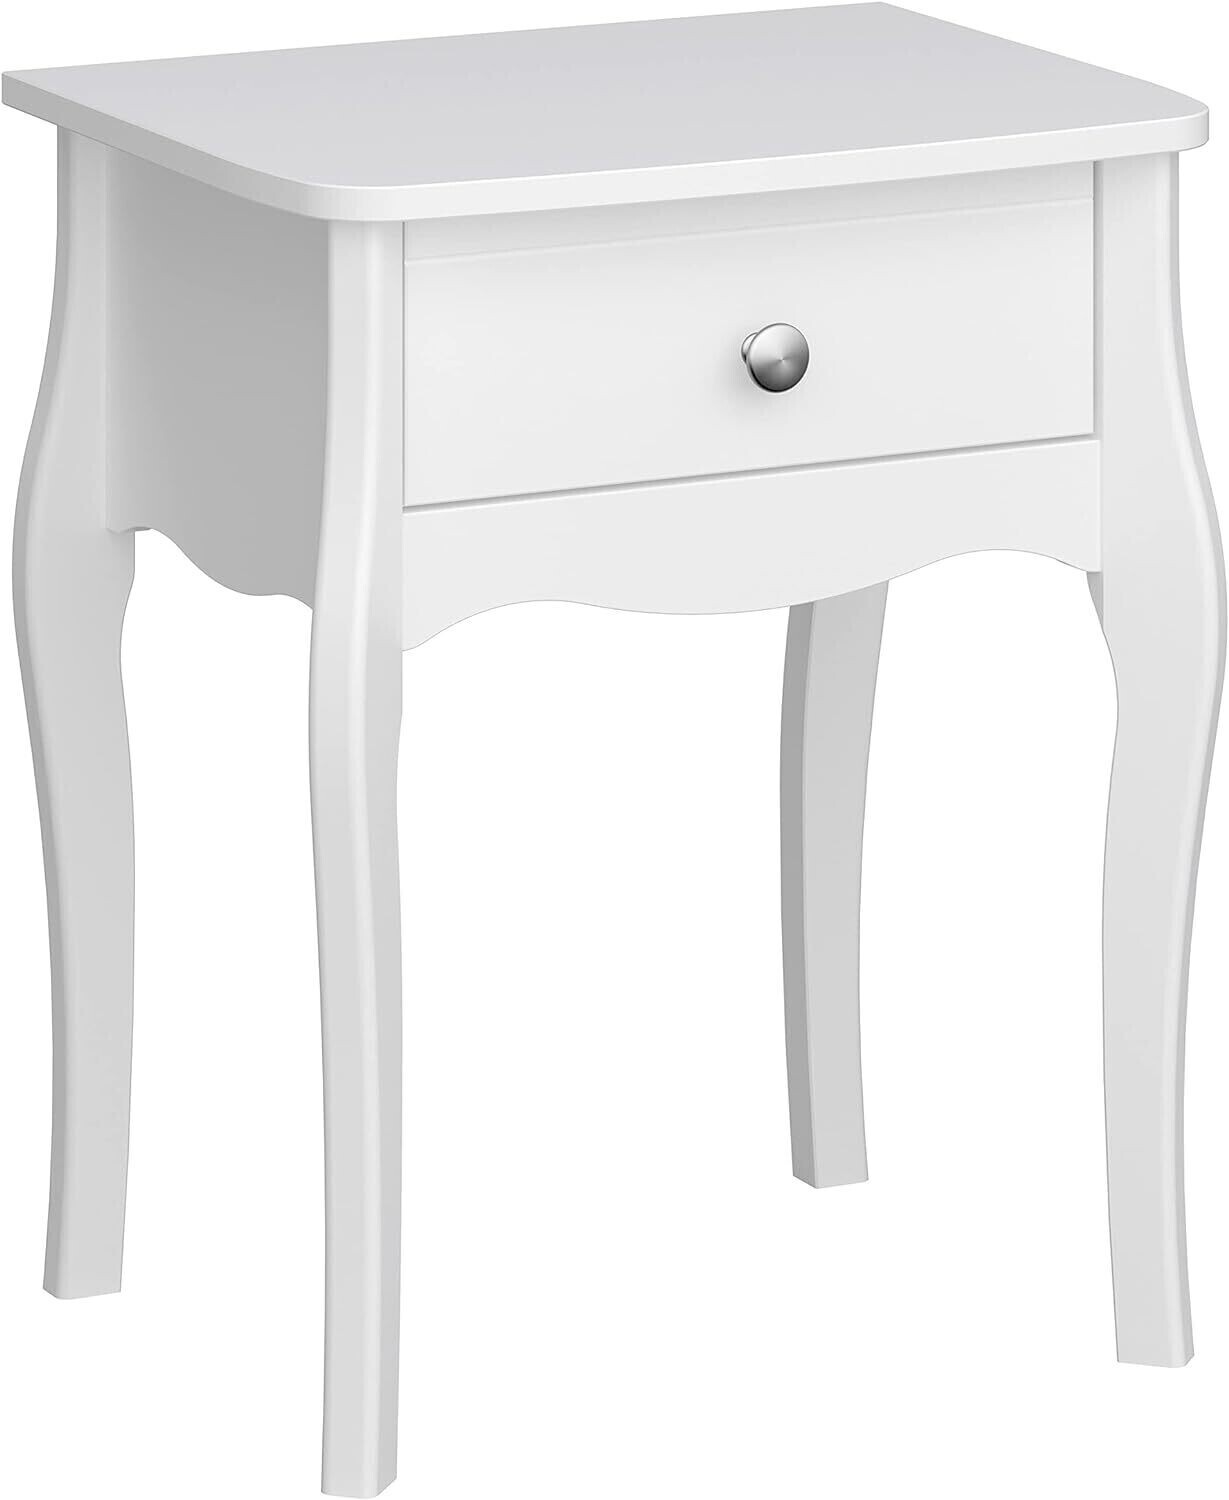 Bedside Table Bedroom Storage Nightstand With Drawer